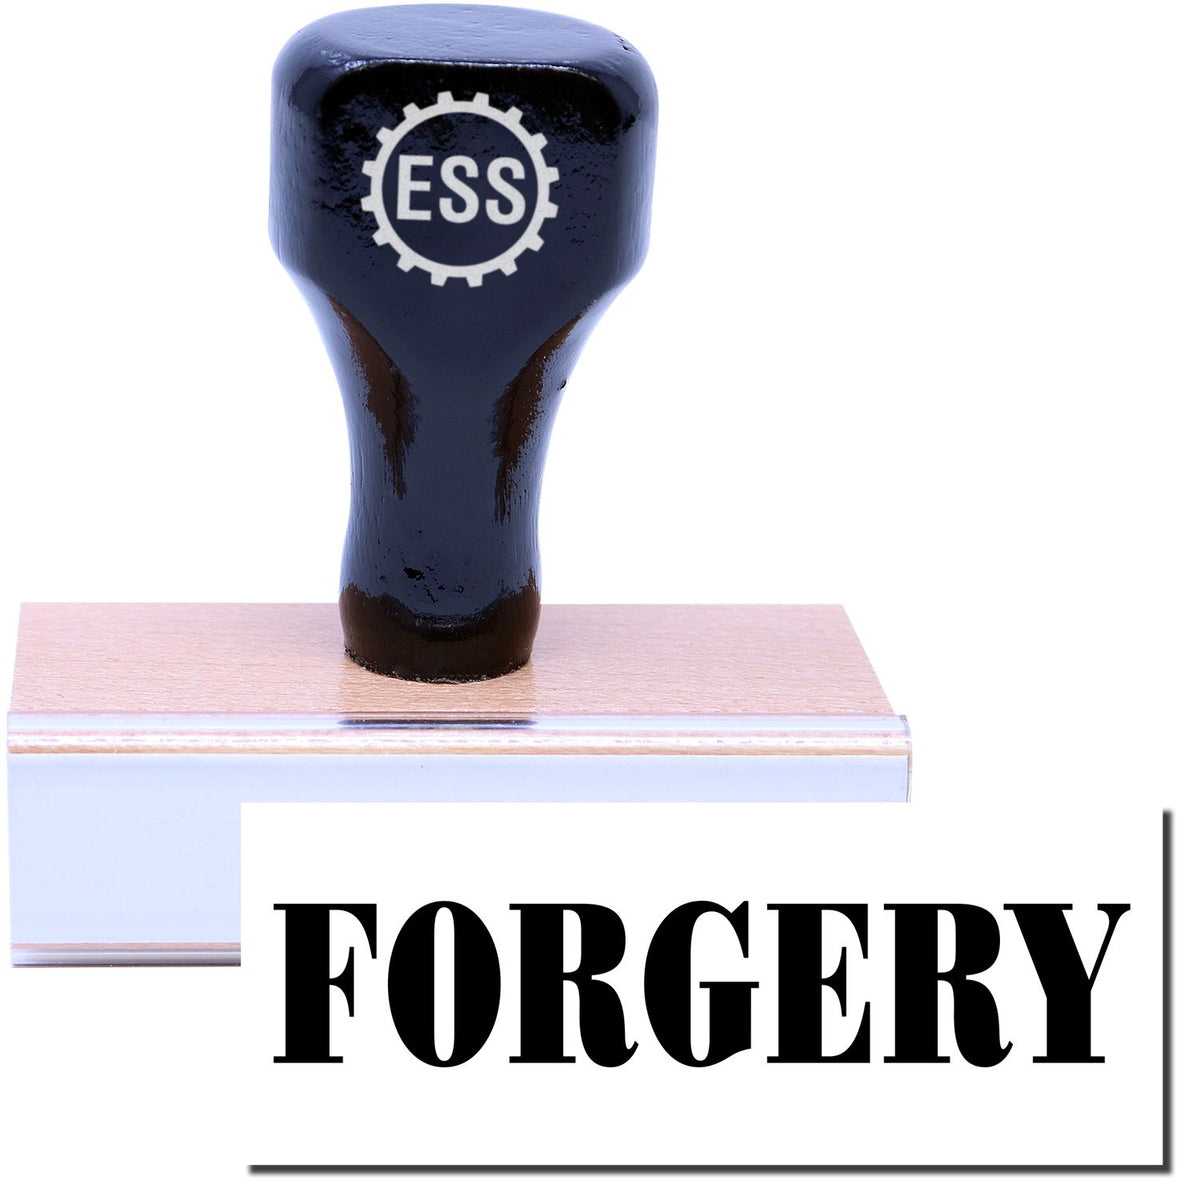 A stock office rubber stamp with a stamped image showing how the text &quot;FORGERY&quot; is displayed after stamping.